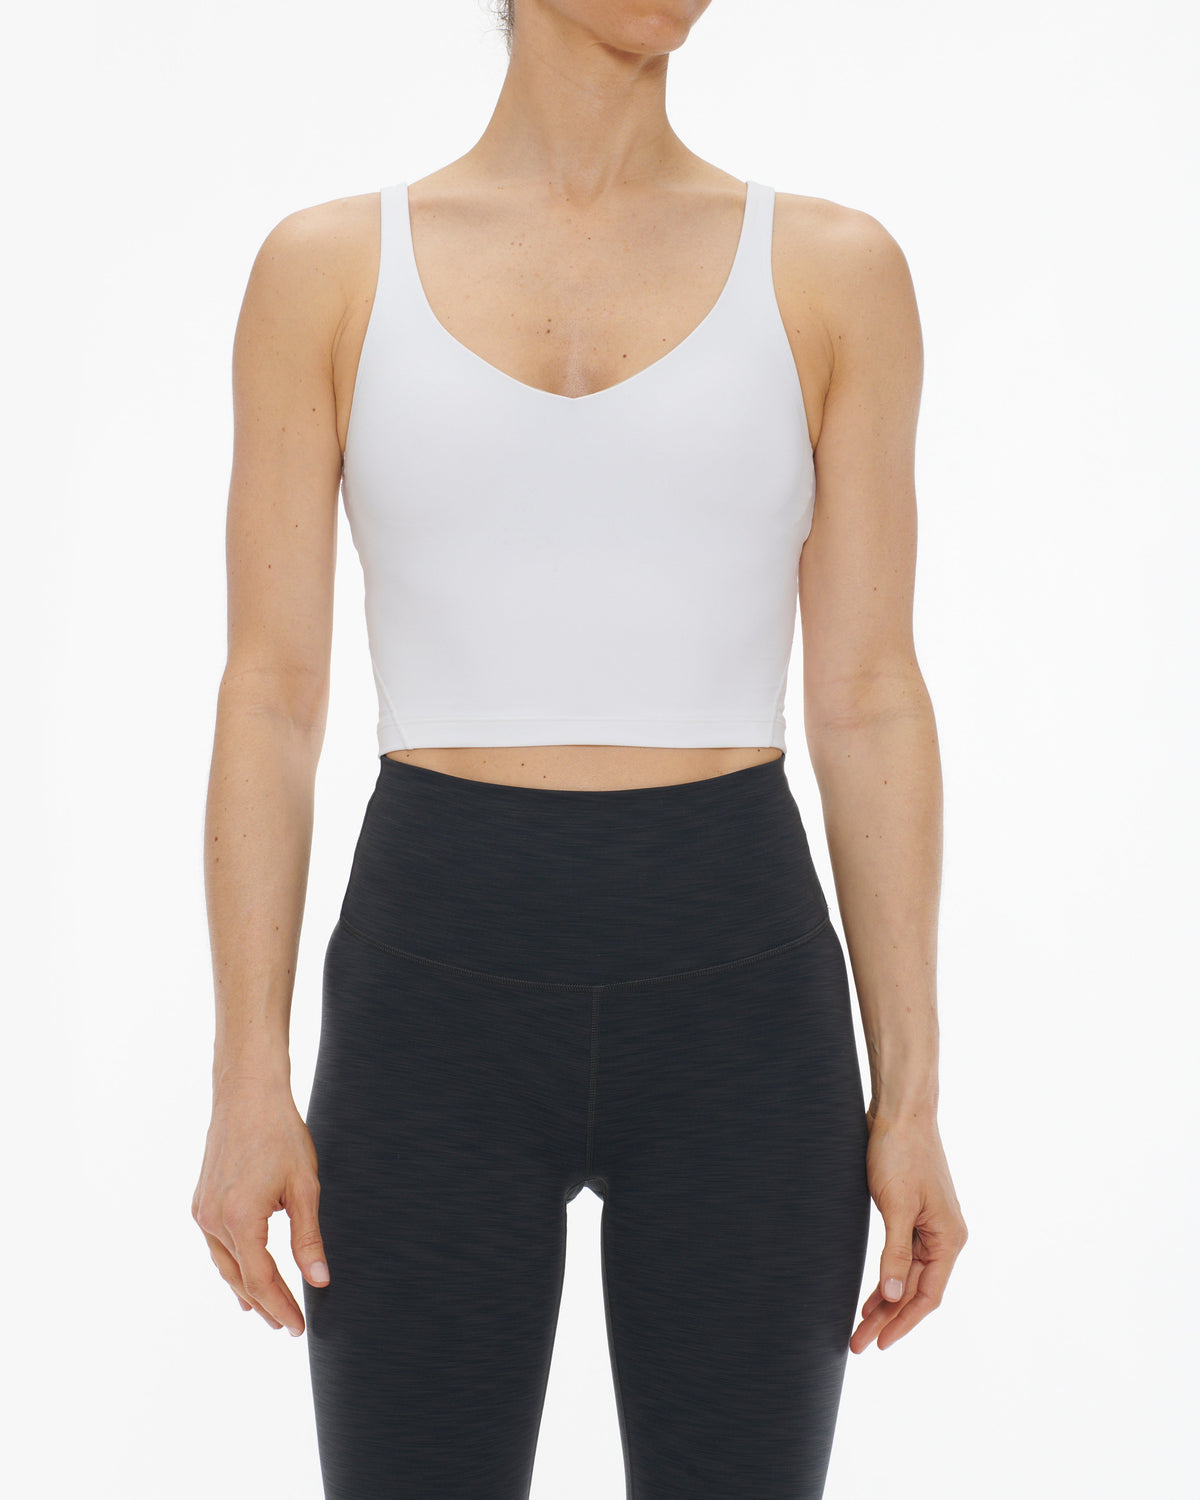 Lululemon align tank white size 10 - $34 (50% Off Retail) - From